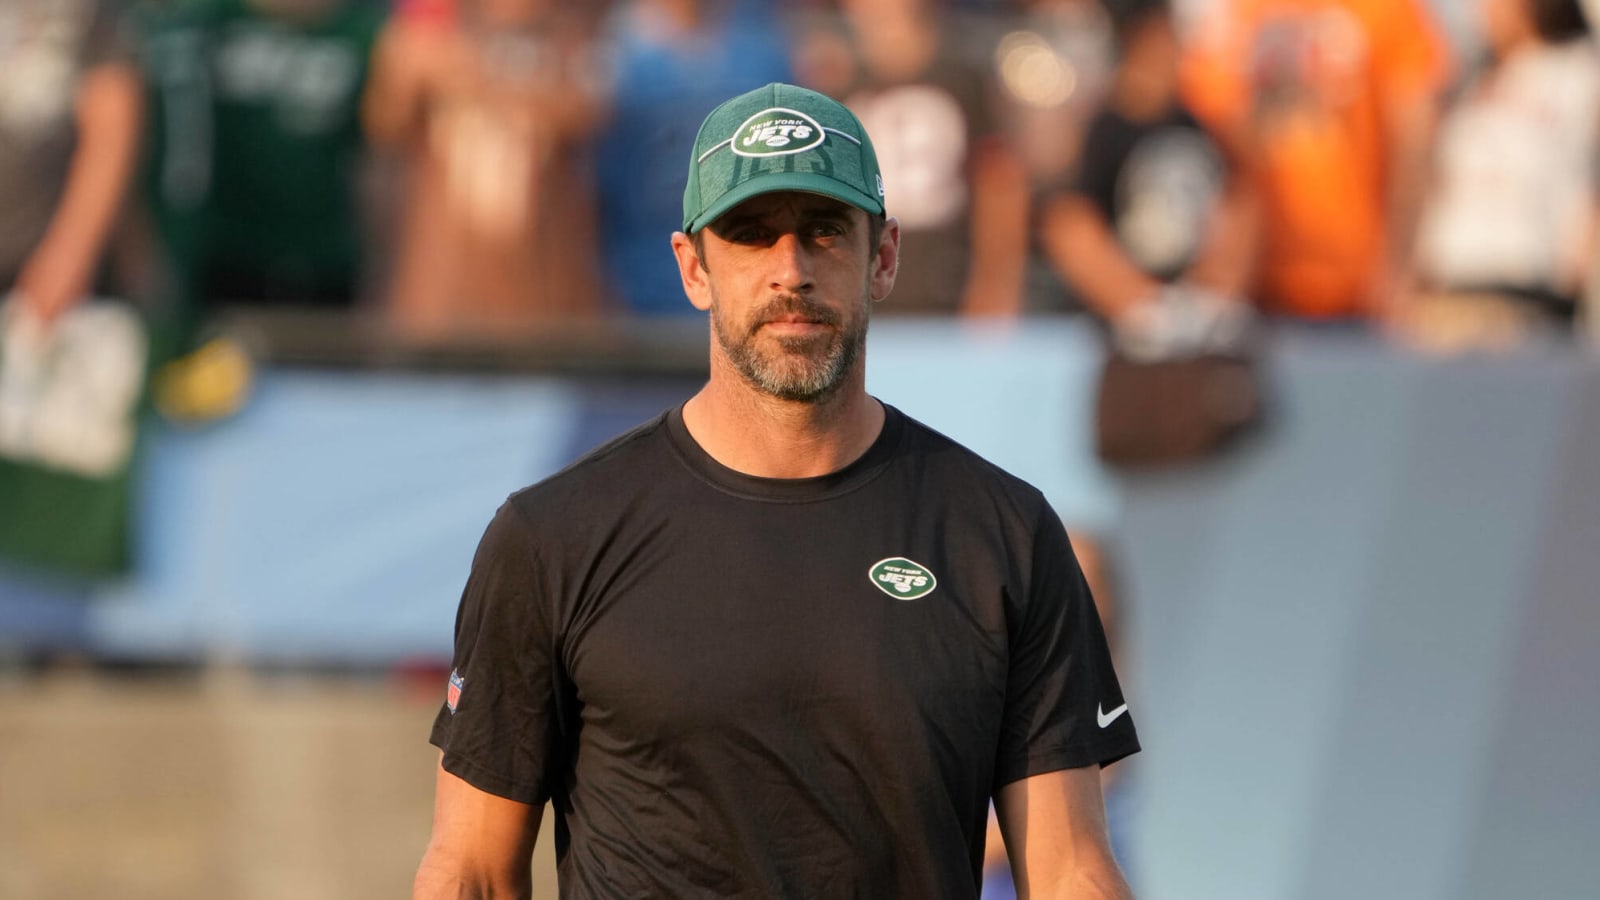 Jets teammates get first glimpse of frustrated Aaron Rodgers